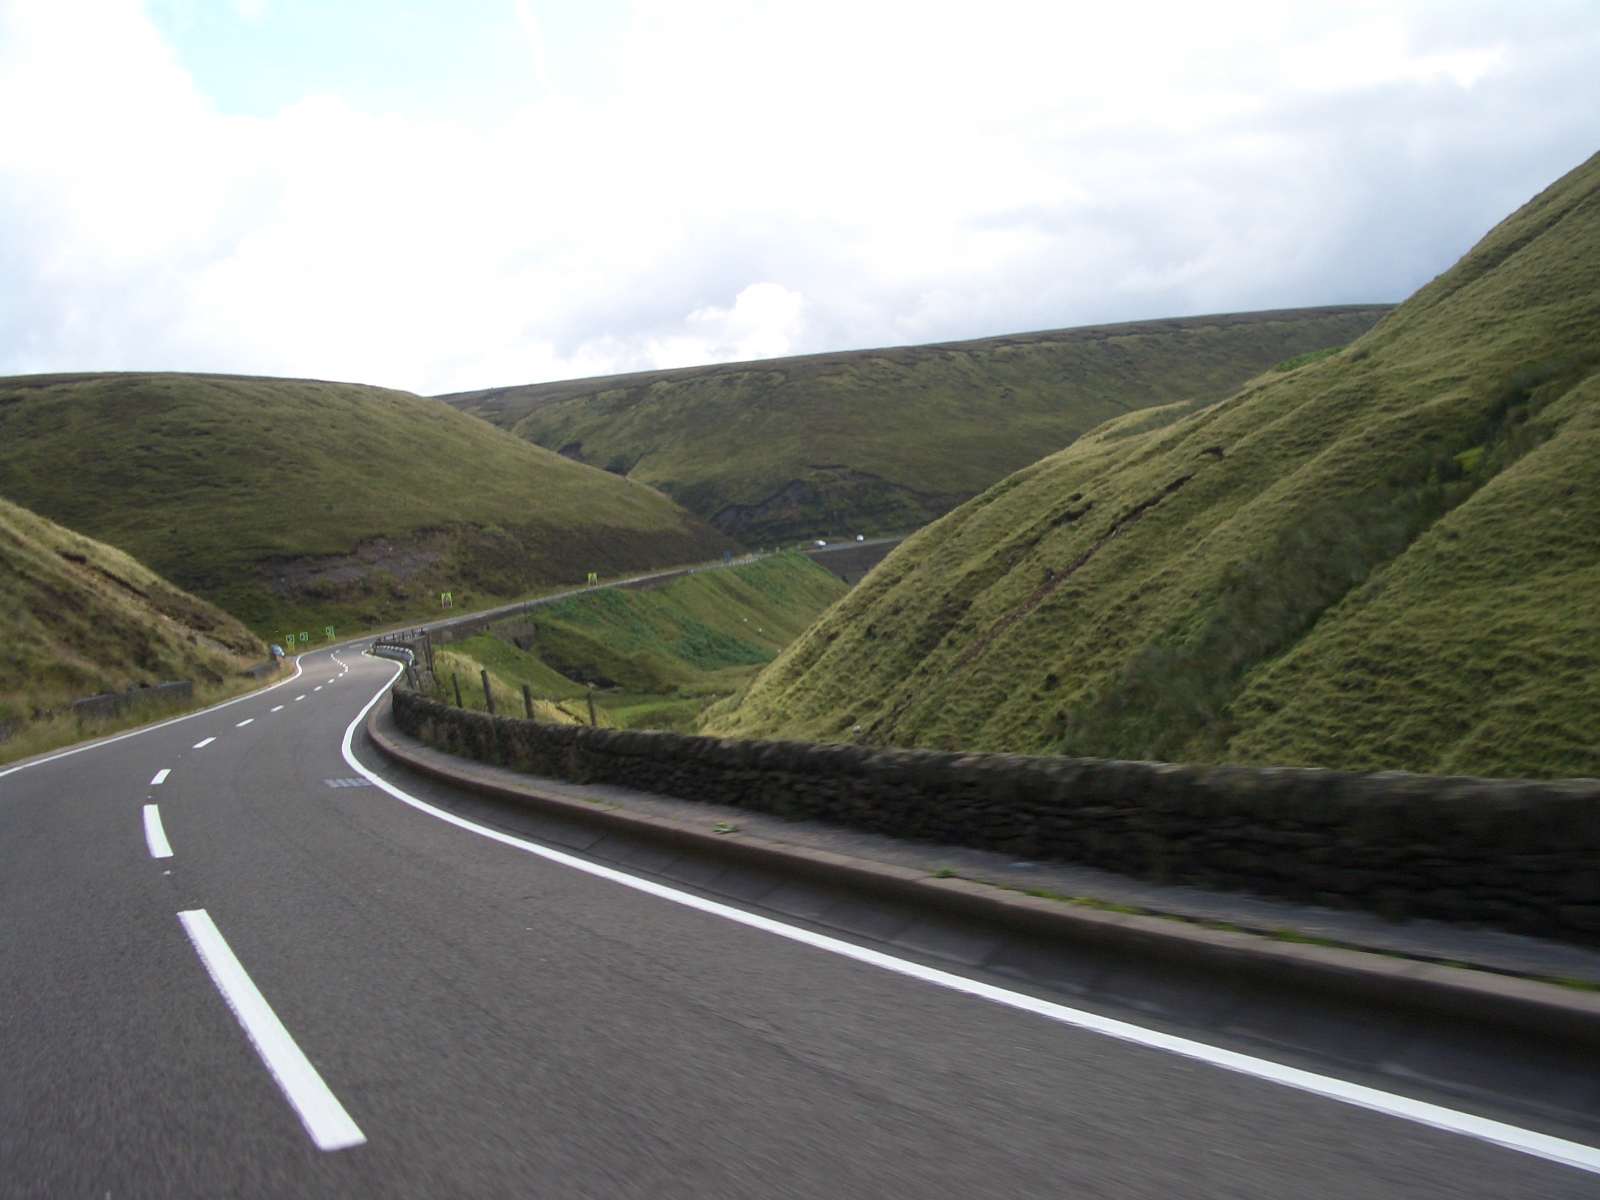 Tackling Snake Pass: Picturesque but Dangerous